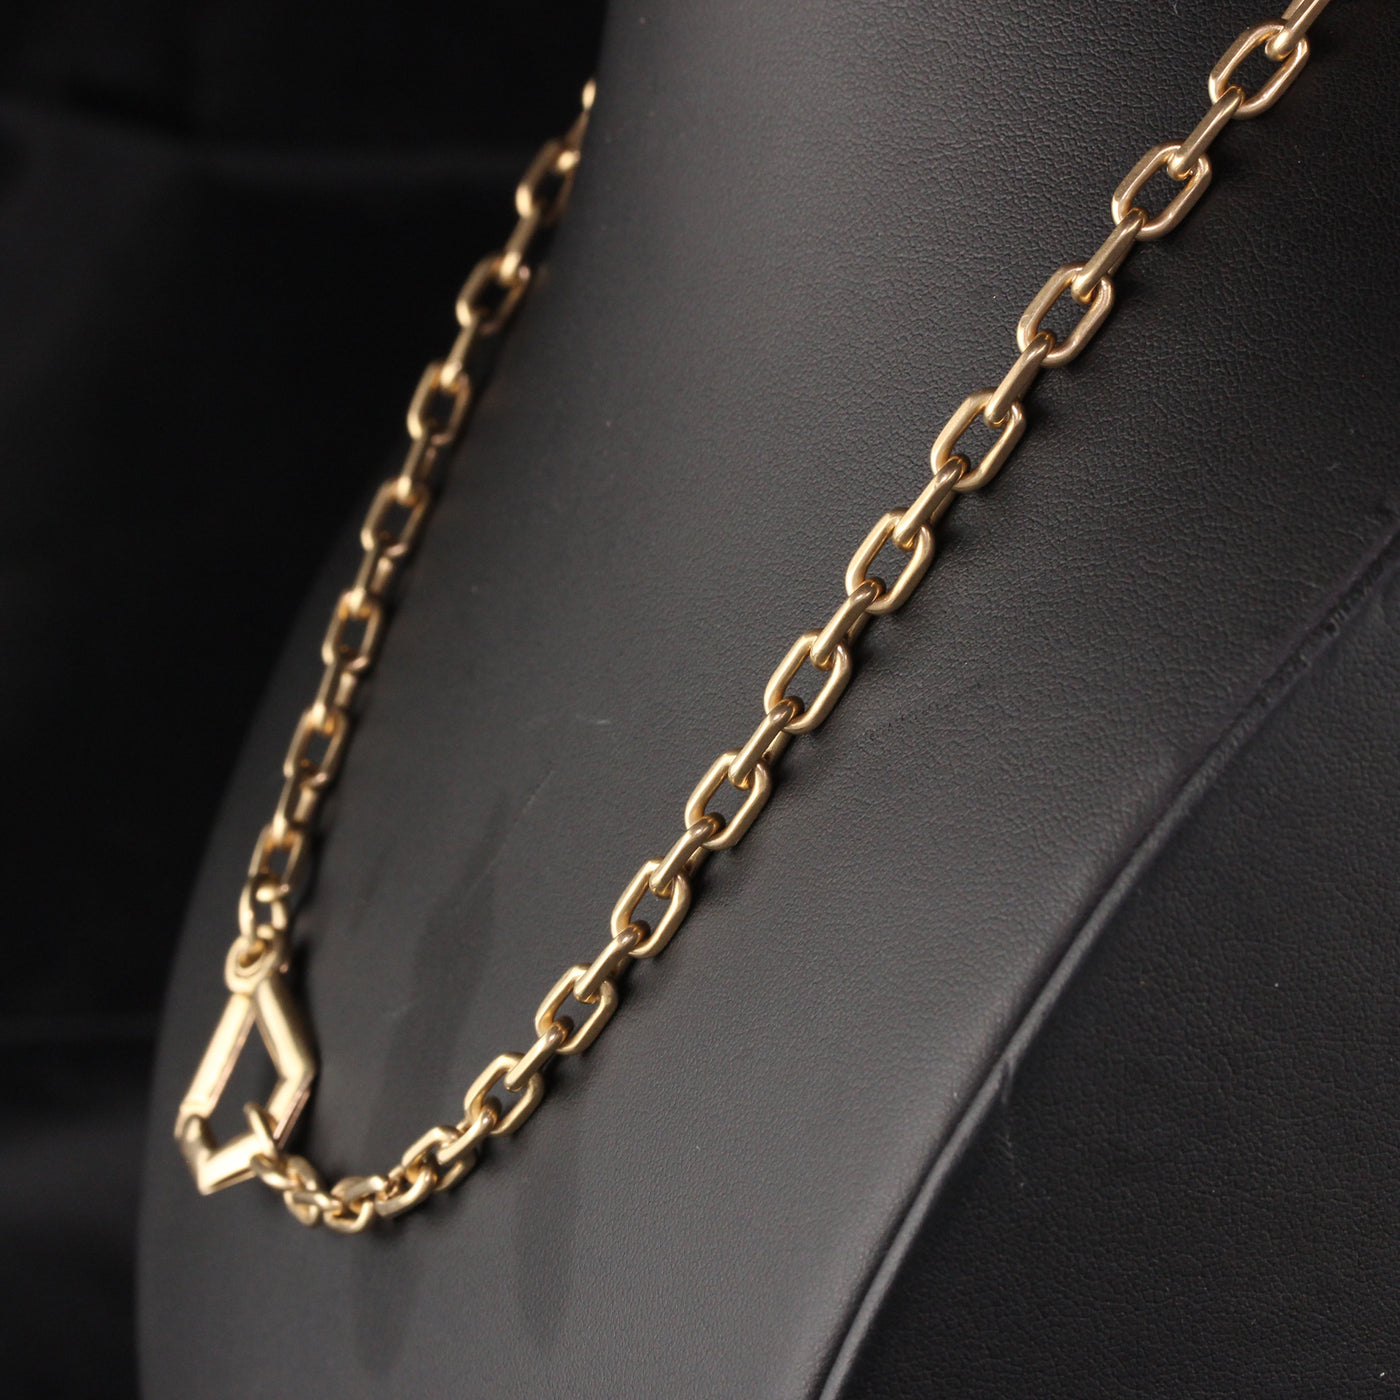 Antique Art Deco 14K Yellow Gold Solid Link Chain Necklace - 19 Inches